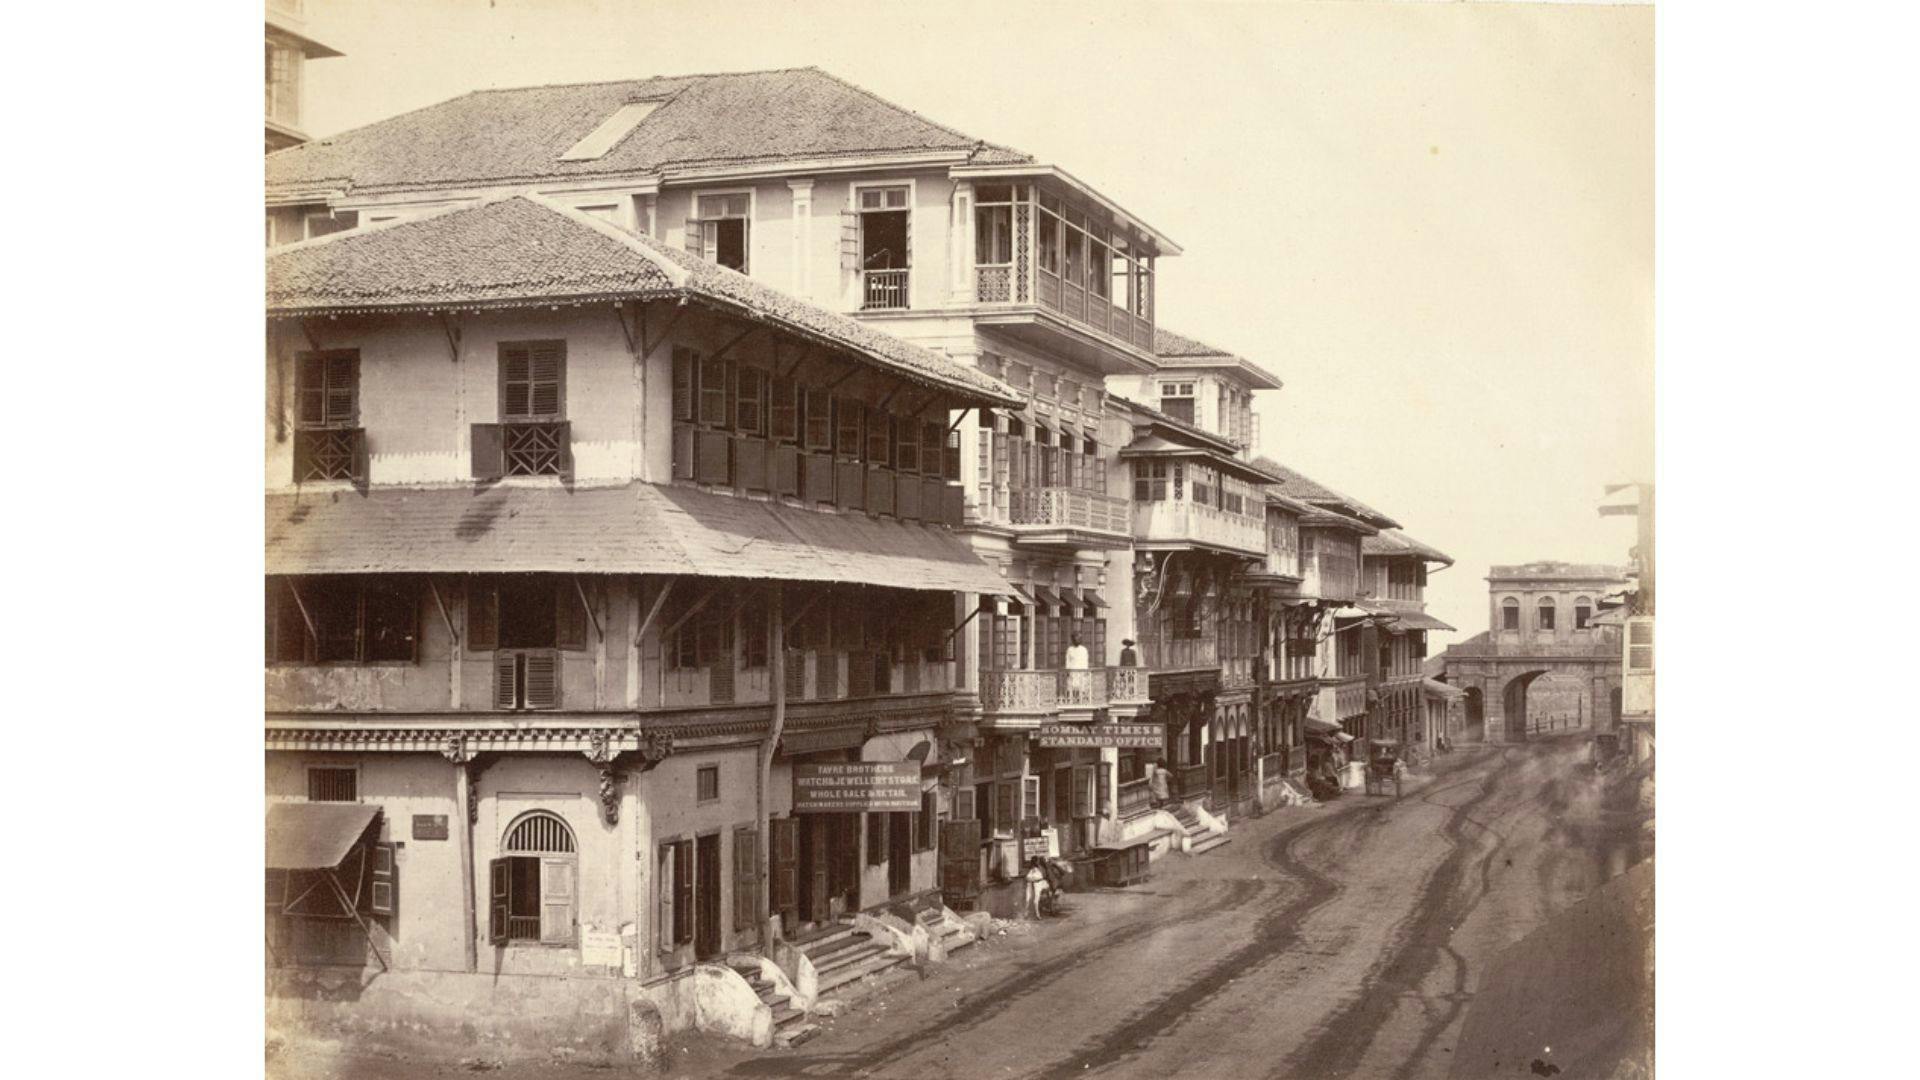 19th century photograph showing a Bombay street | British Library